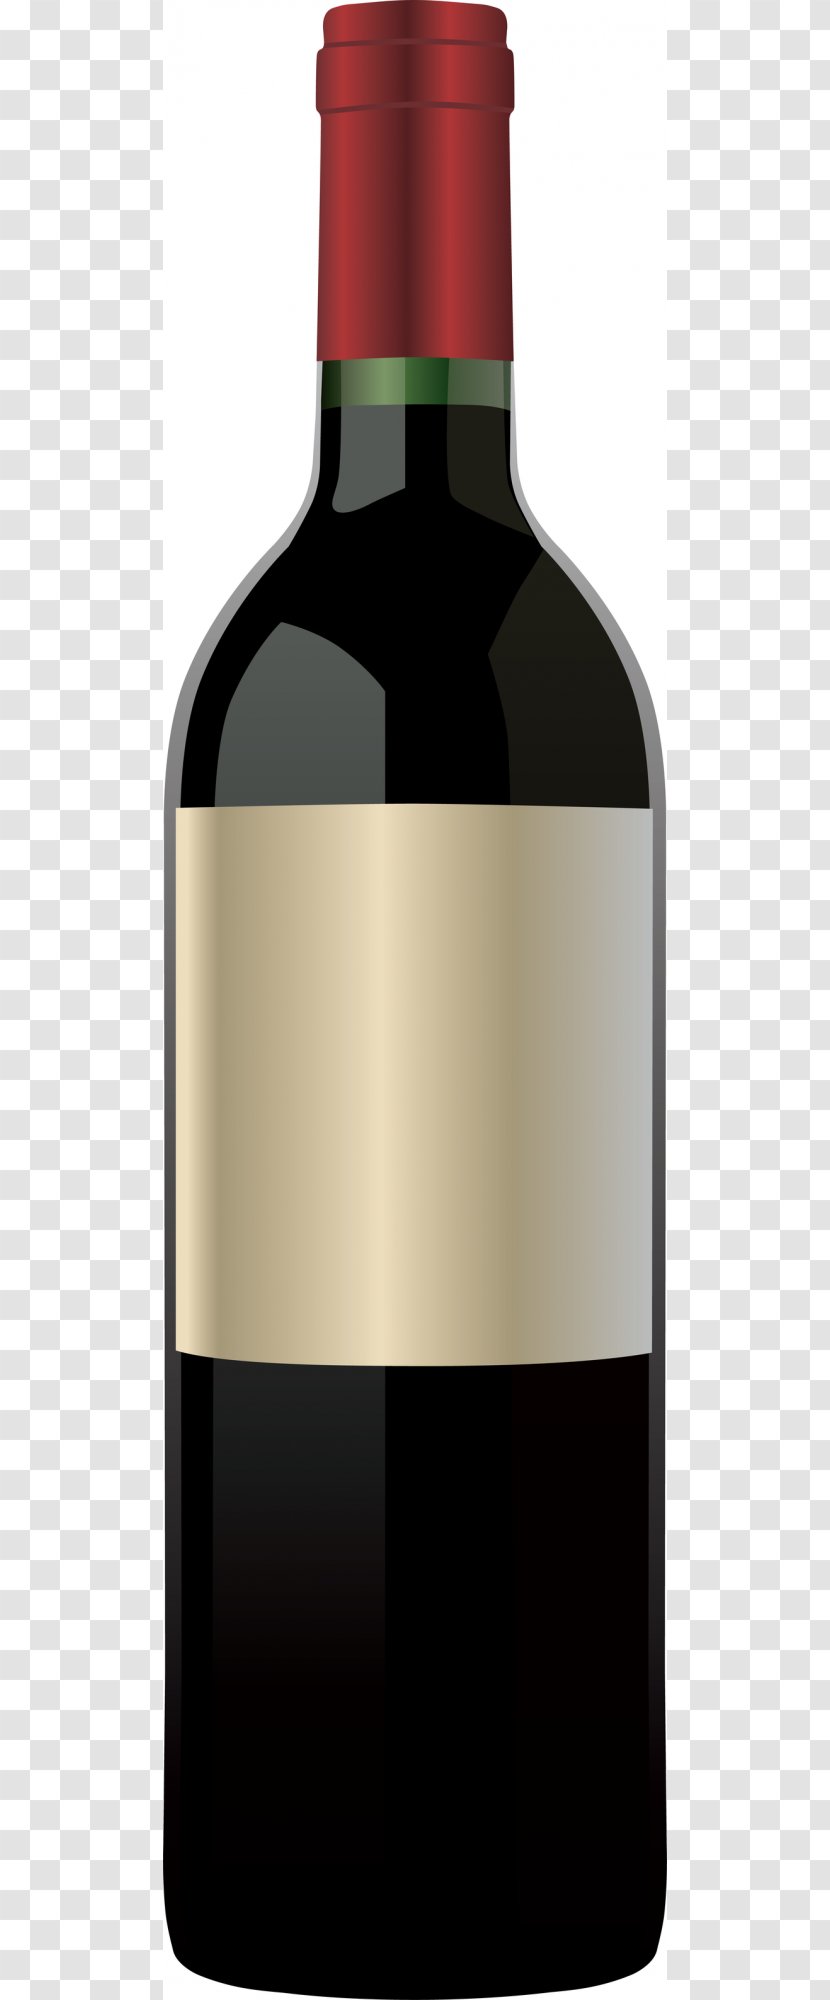 Red Wine Bottle Glass - Box Transparent PNG